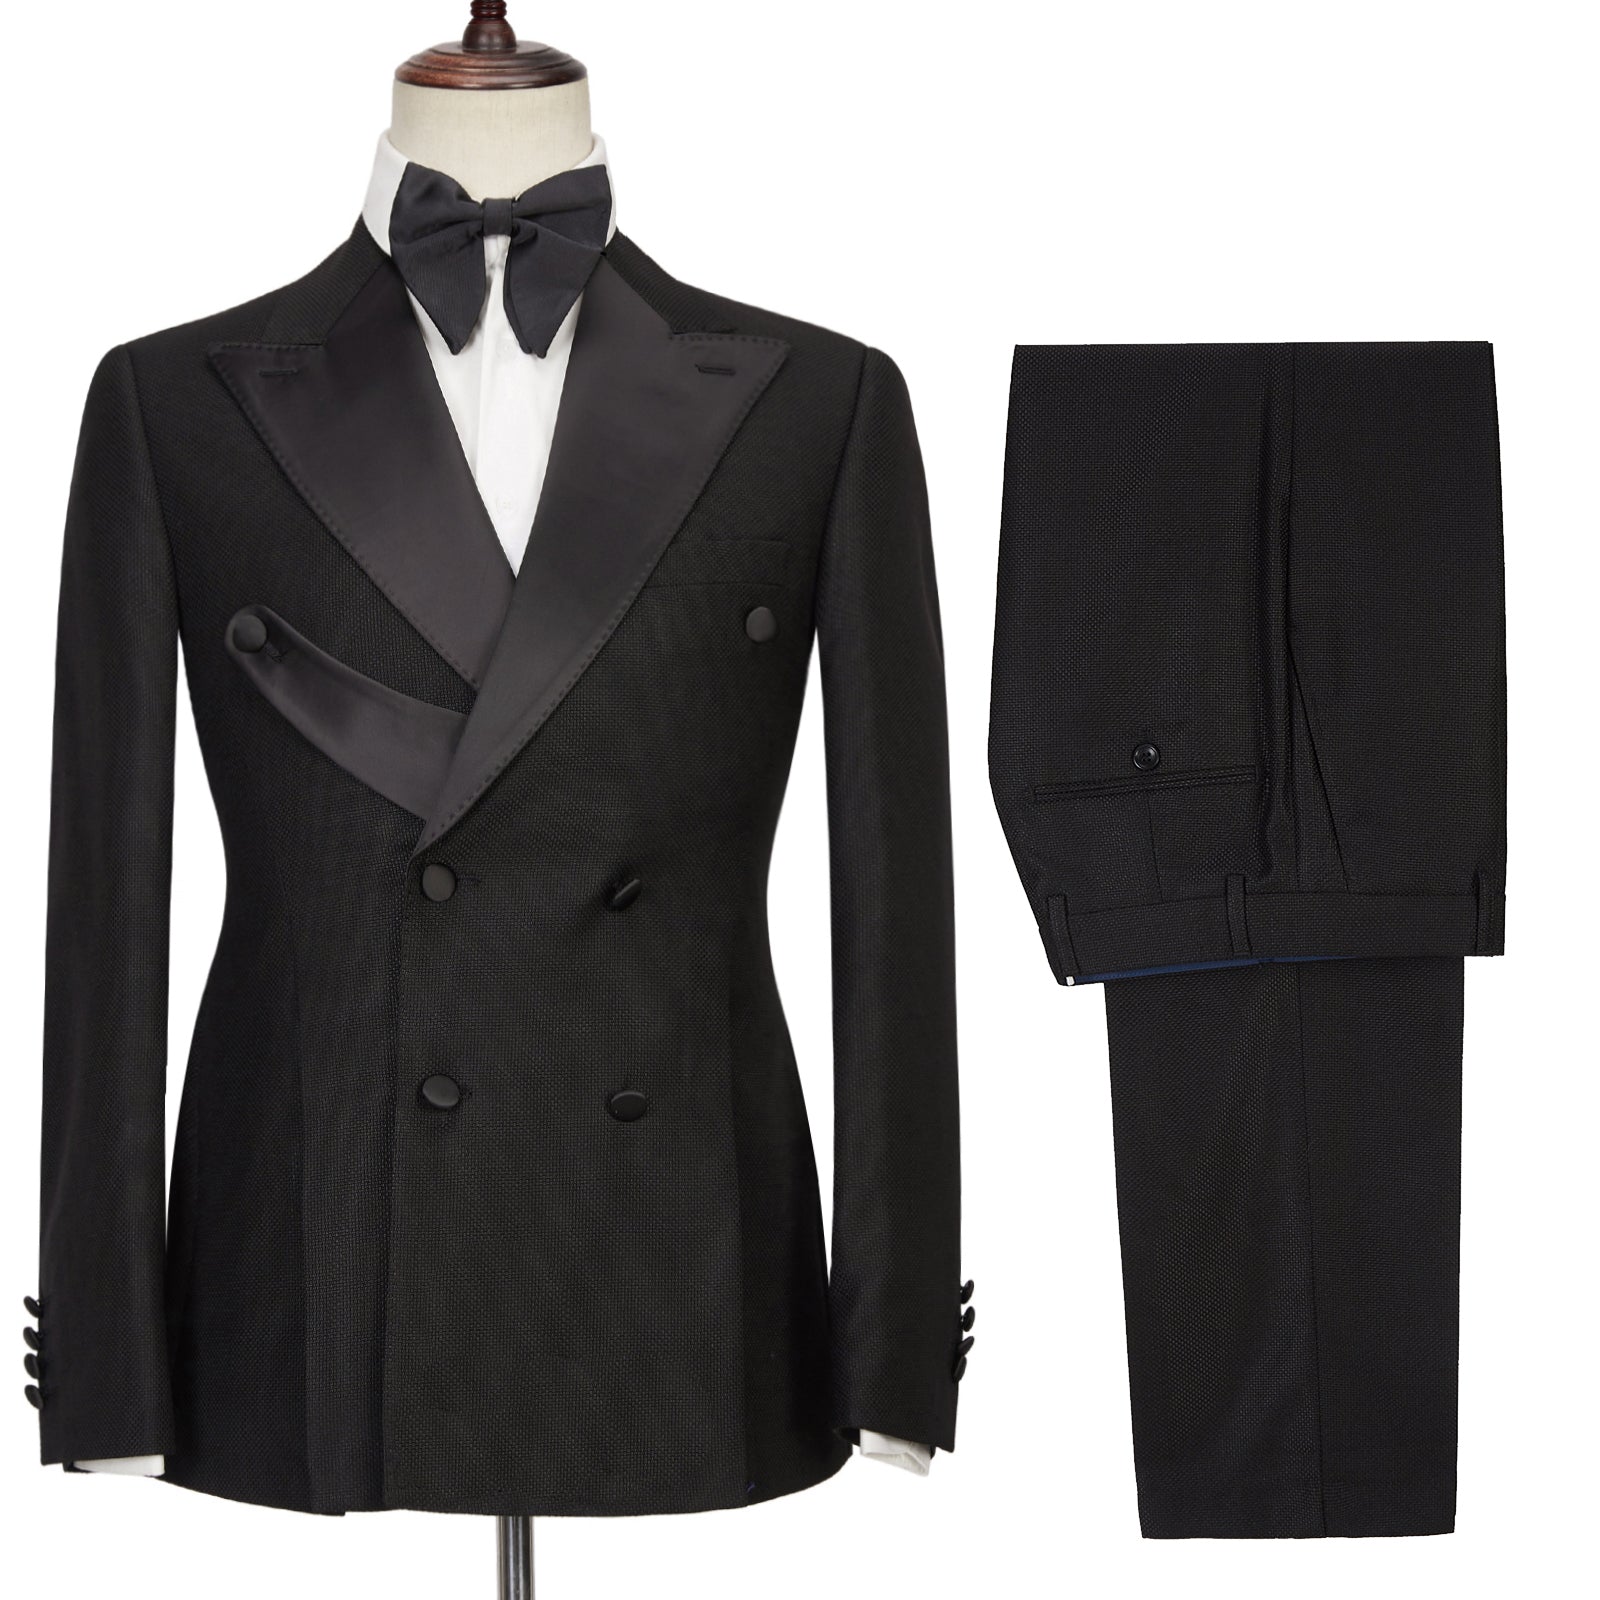 Gavin Latest Design Men's Suits: Black Double Breasted Peaked Lapel Best Fitted-Wedding Suits-BallBride